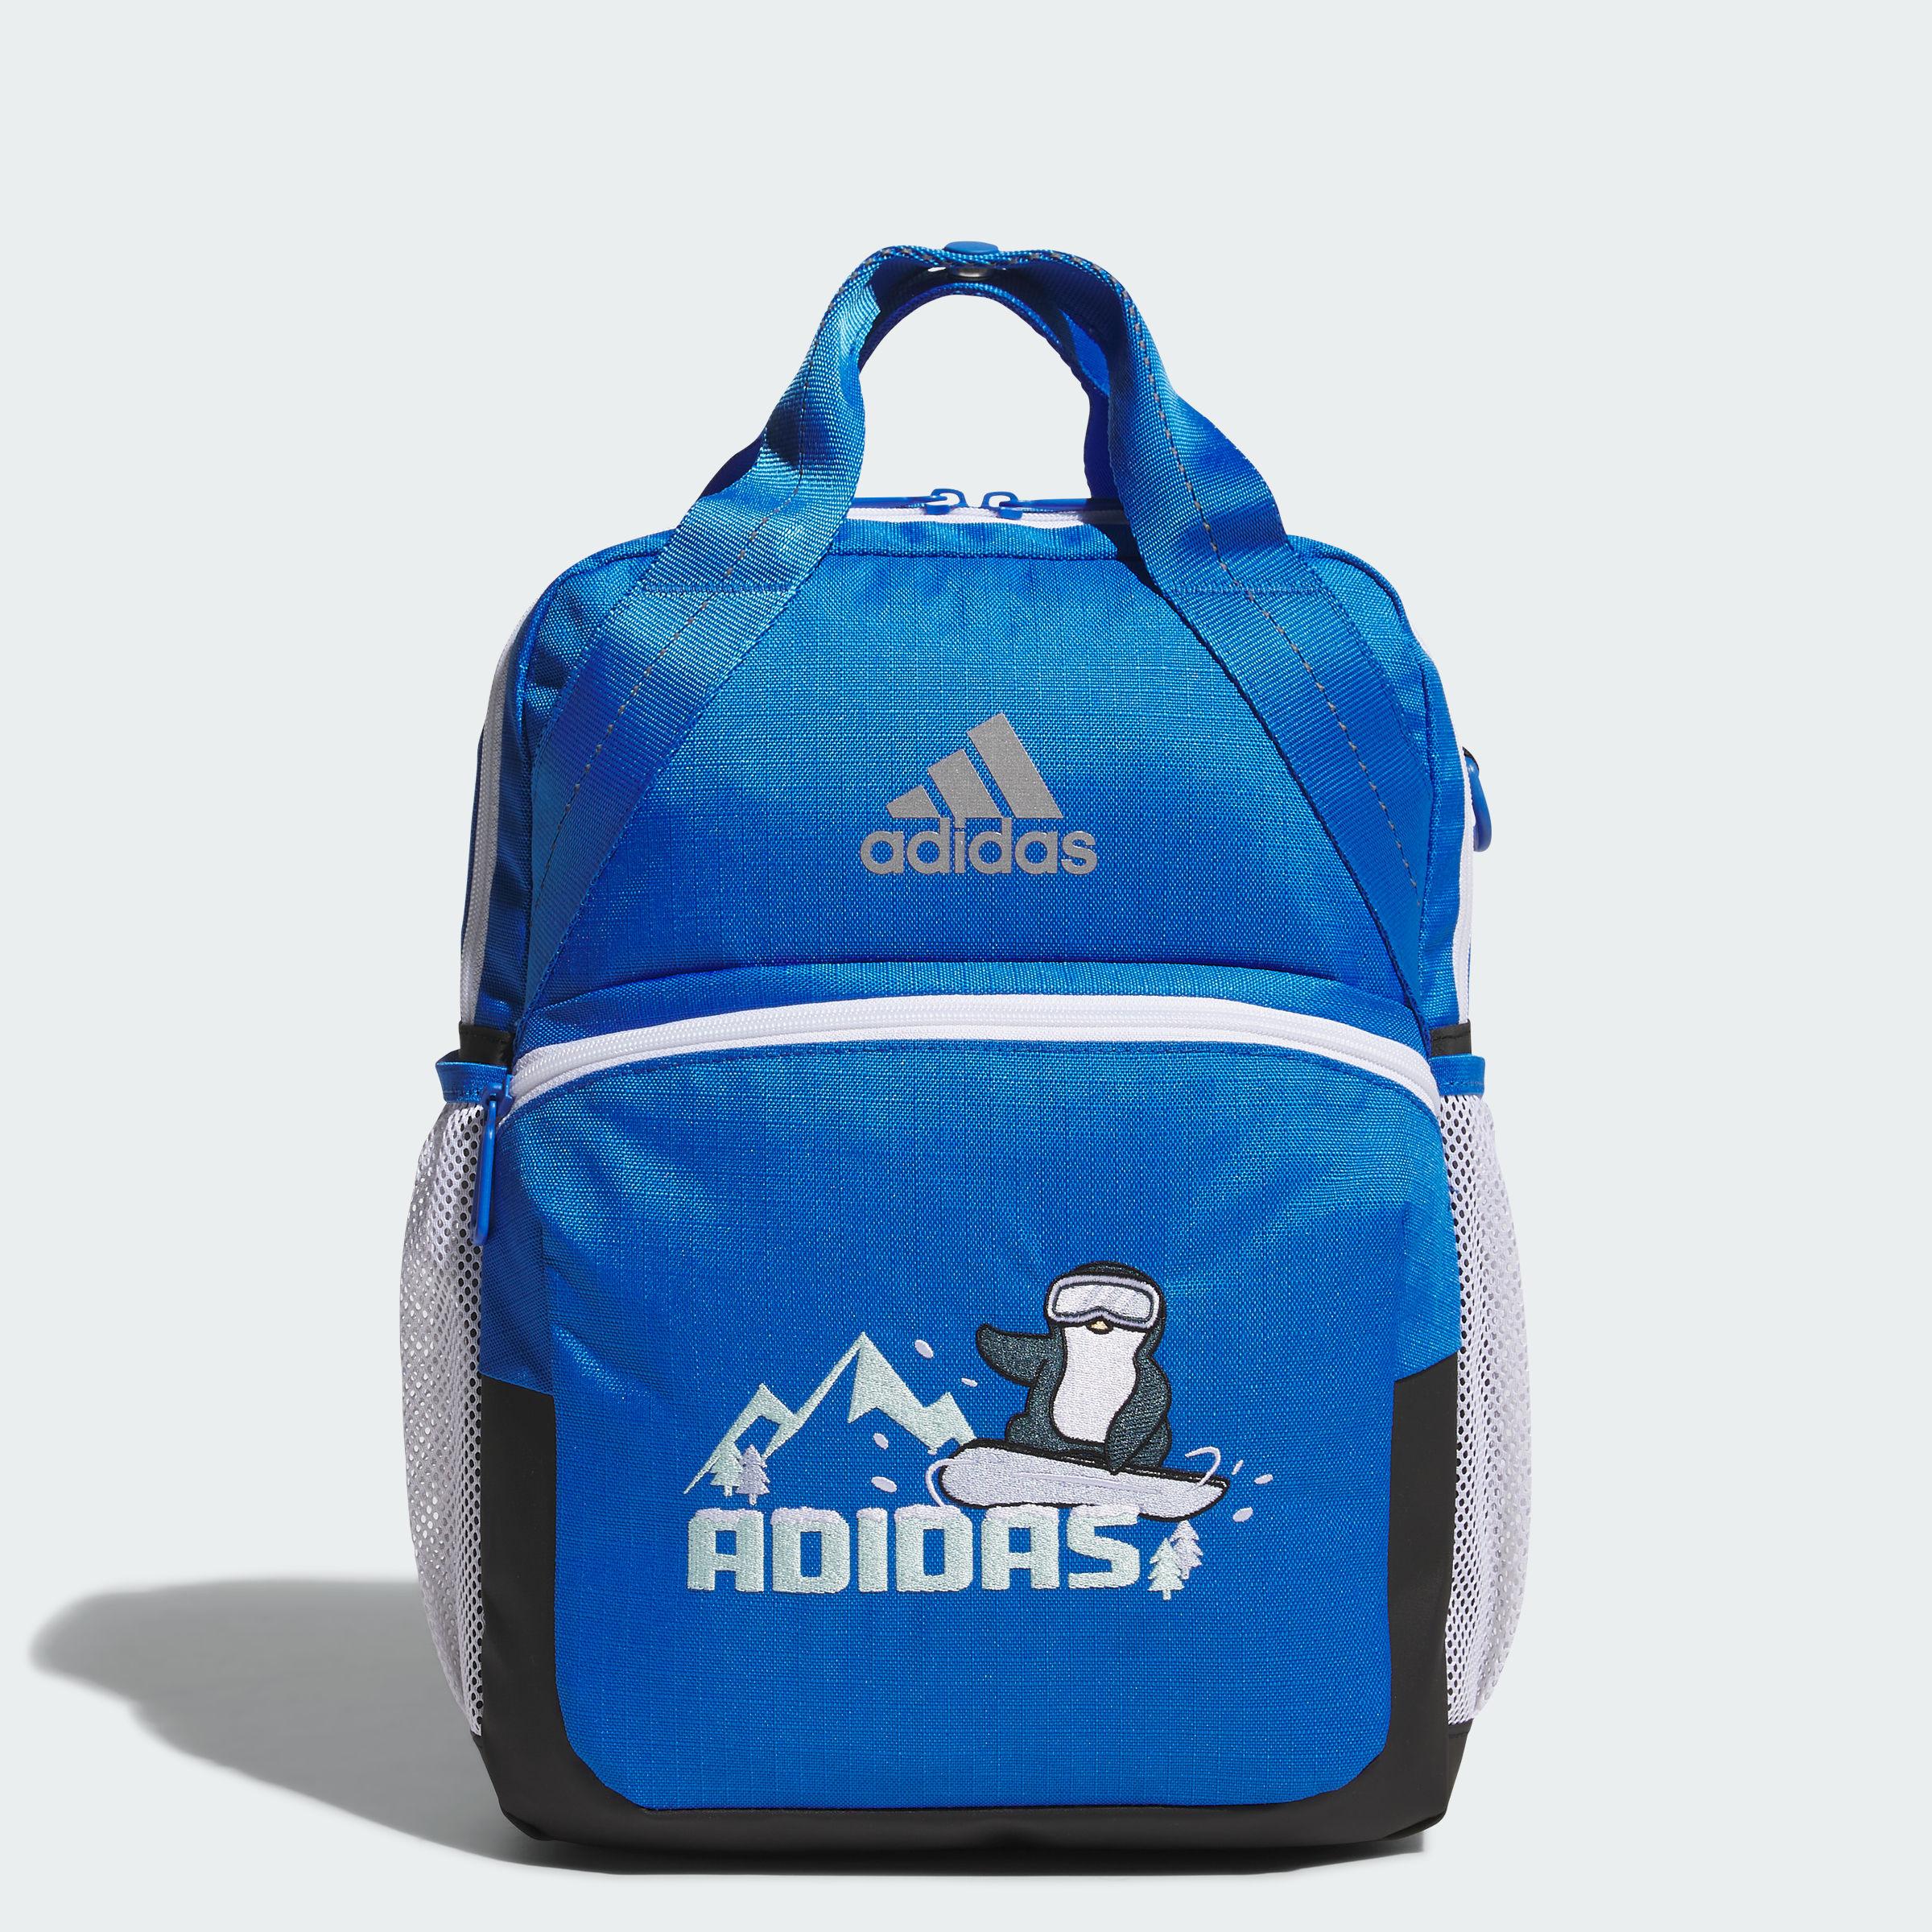 ACC, Adidas, bag, CCA - ACCHW,open for kids